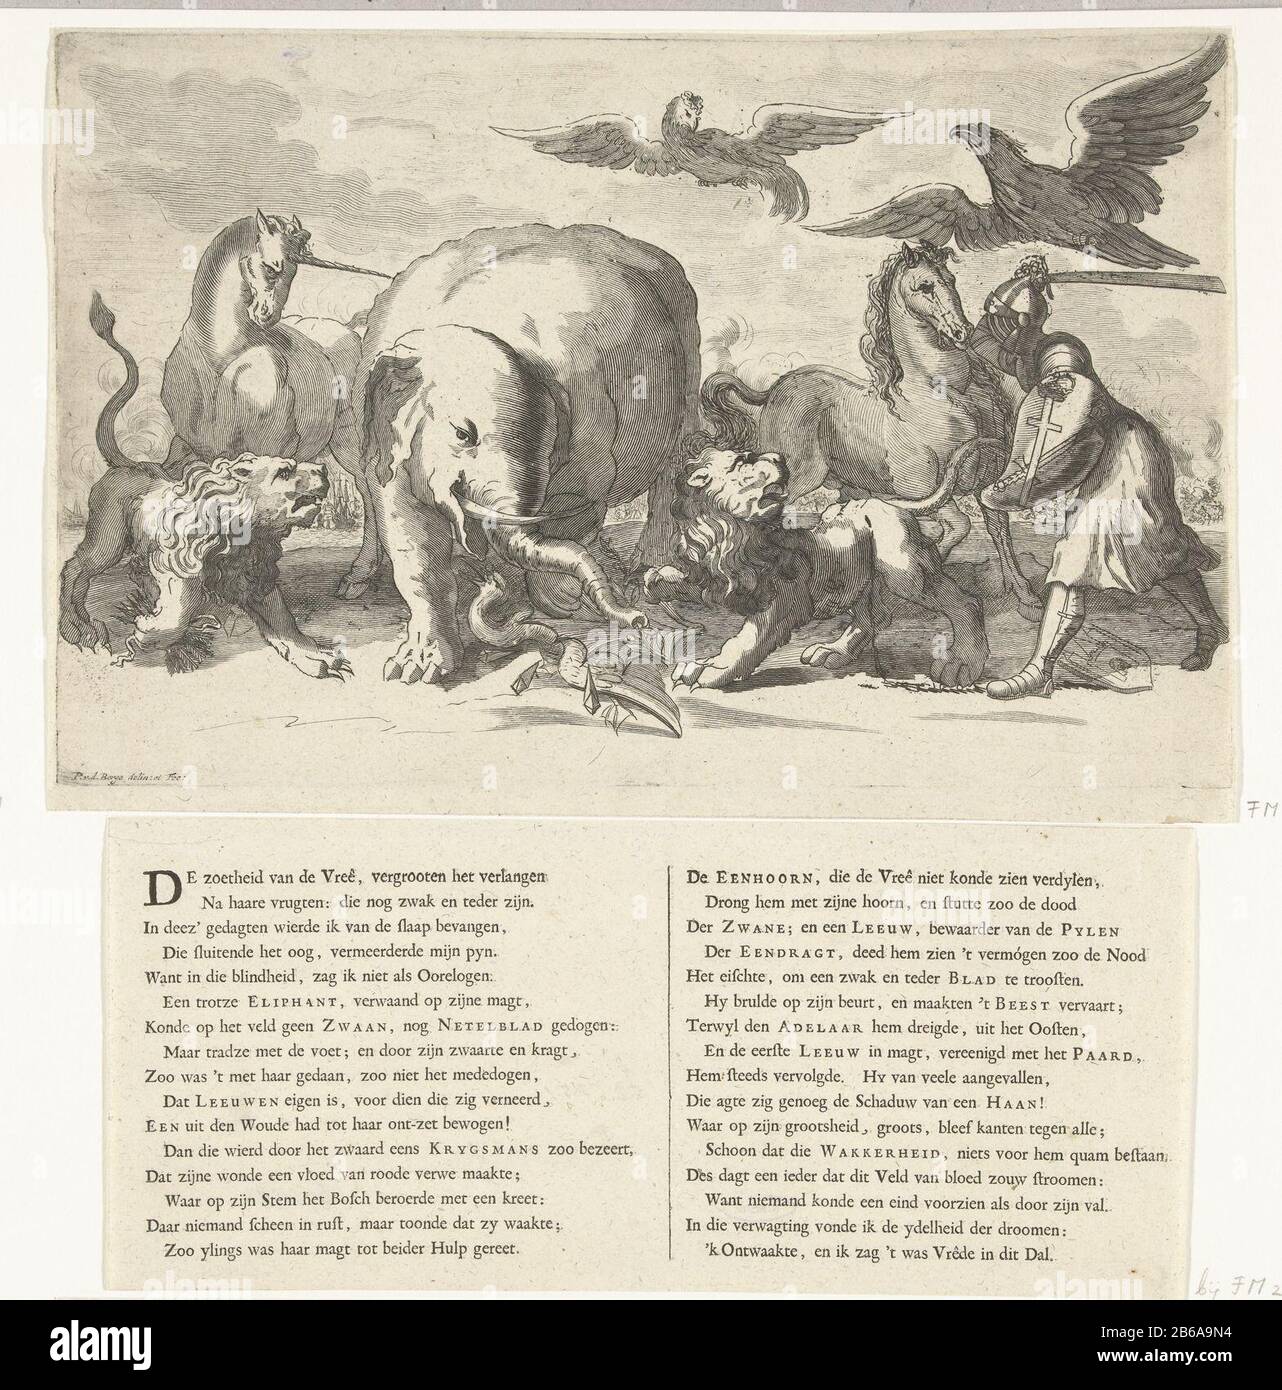 Allegory of the Nordic war in 1700 Allegory on the Great Northern War and  Peace Travendal concluded between Denmark and Sweden, 18 Allegory August  1700. Where: animals symbolize the warring parties. Central